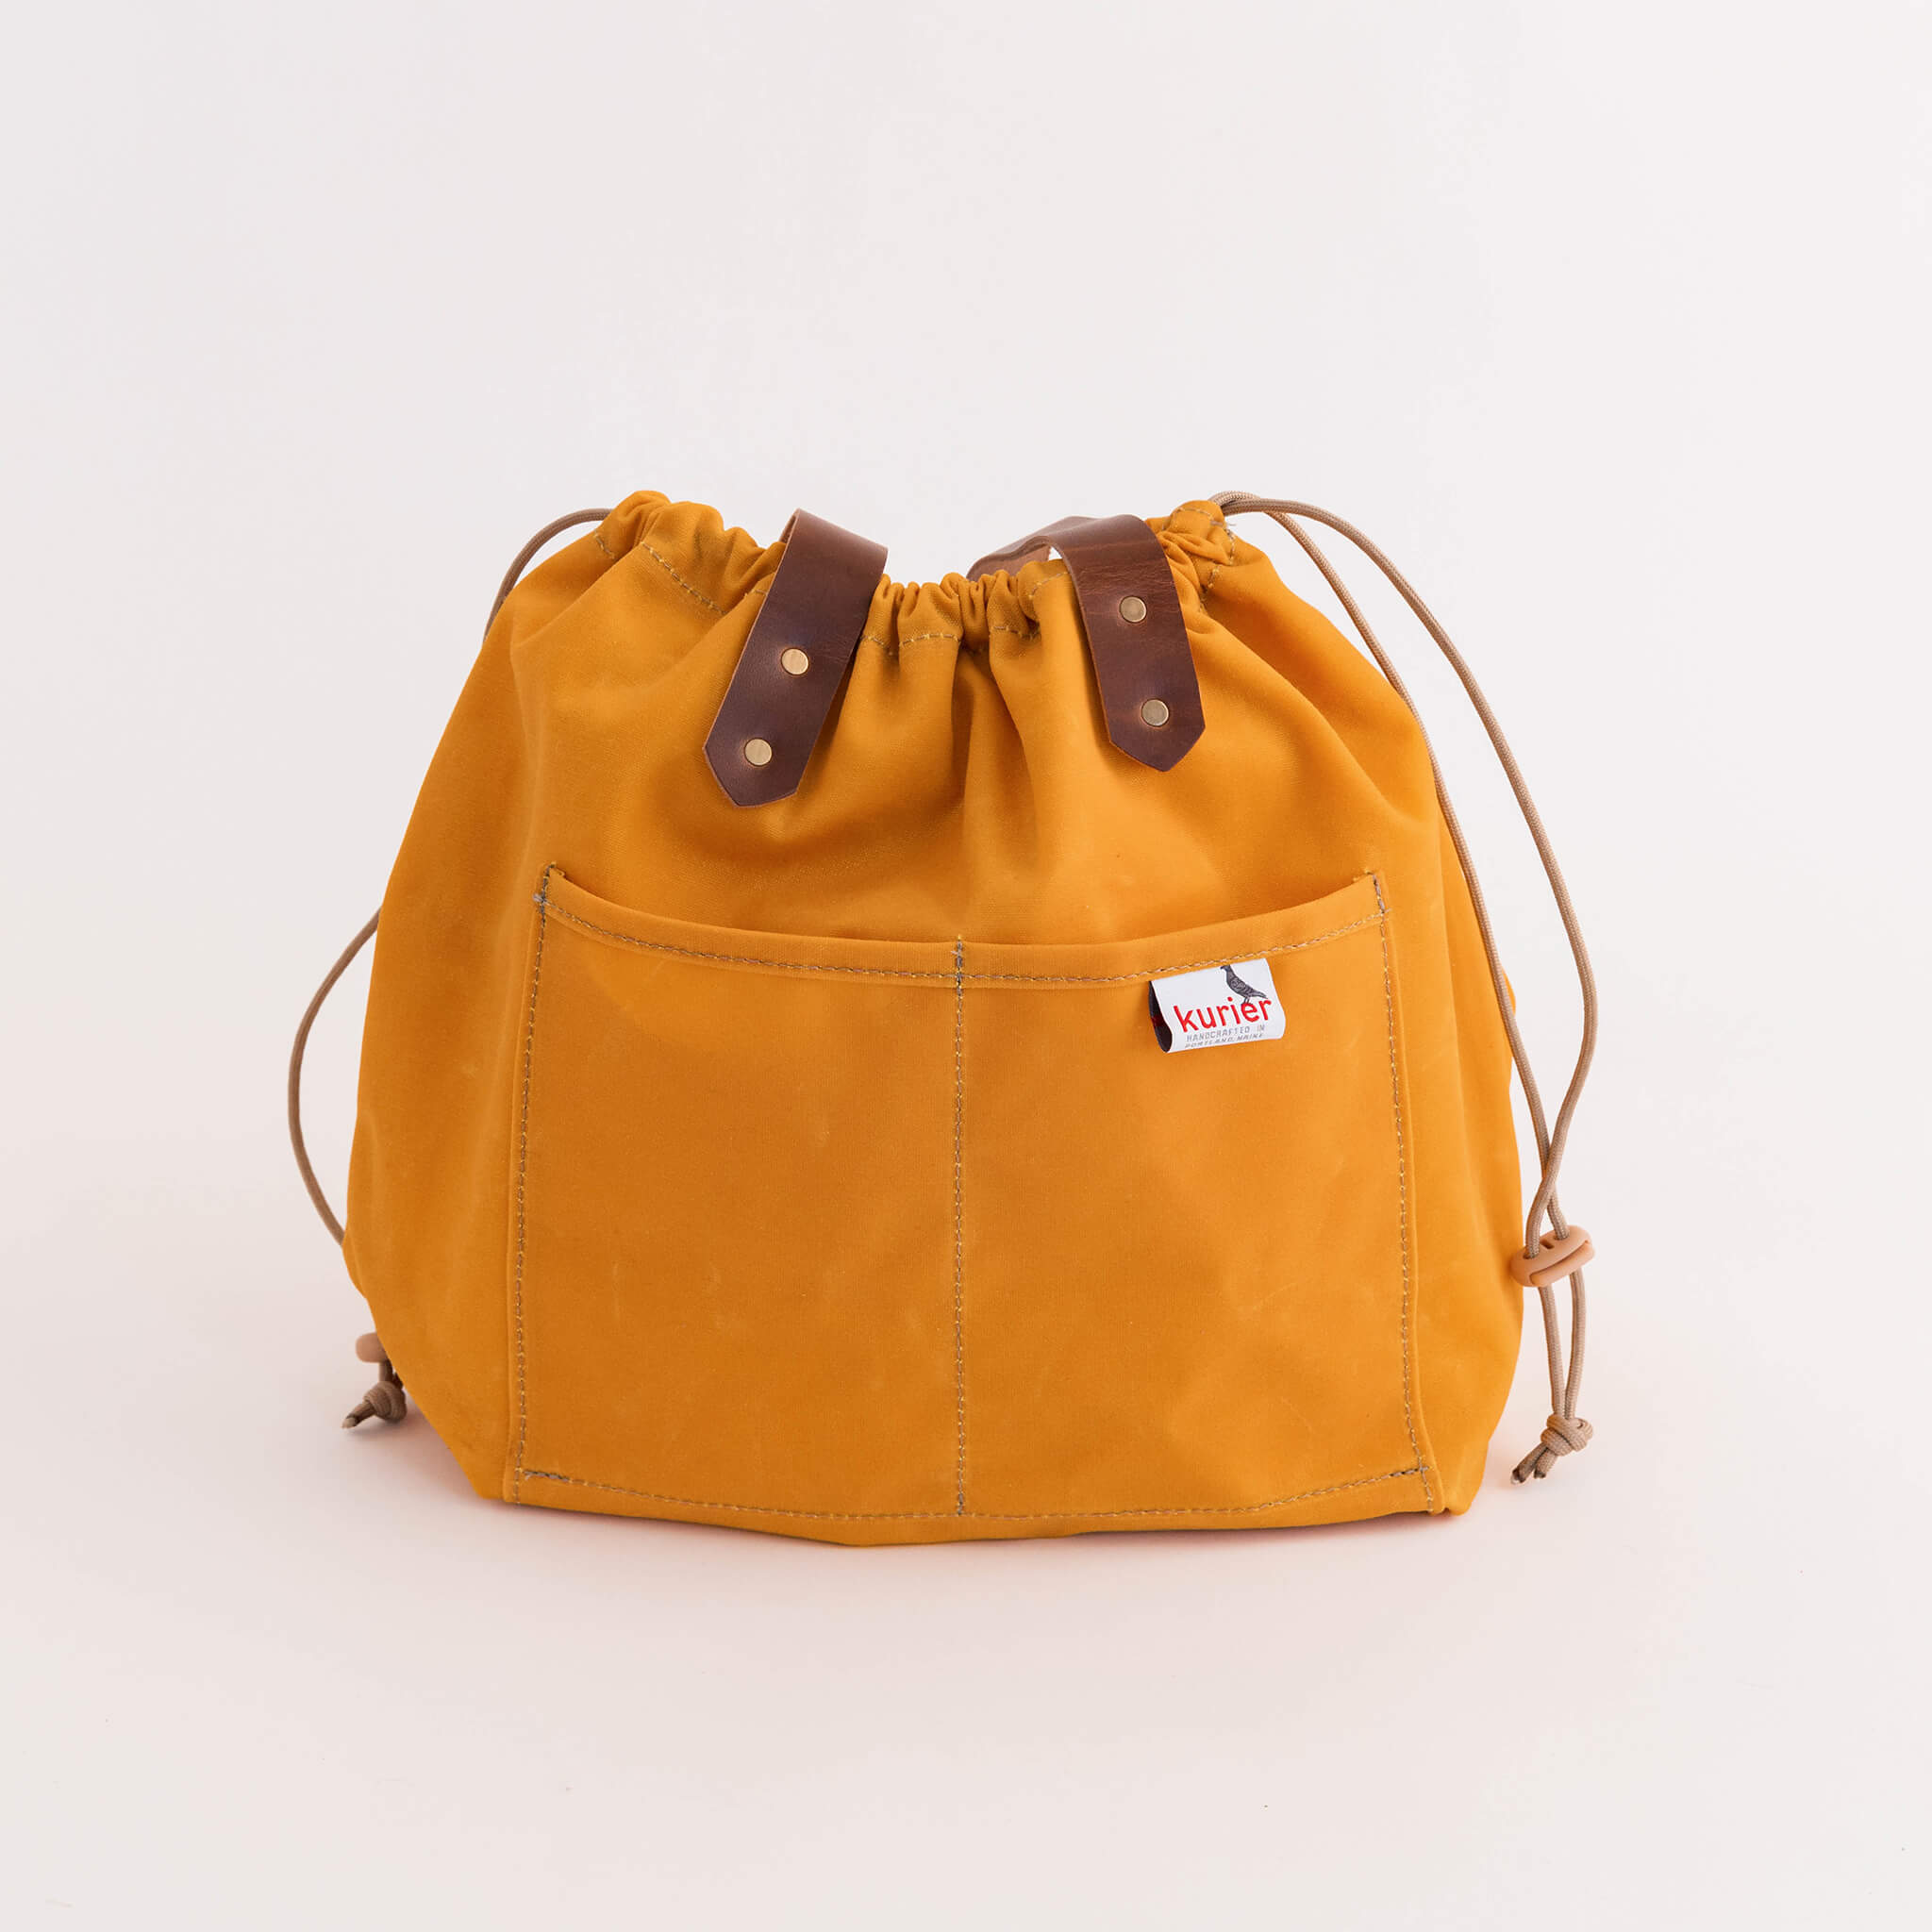 waxed canvas town tote - drawstring travel bag - handmade leather - buttercup closed view